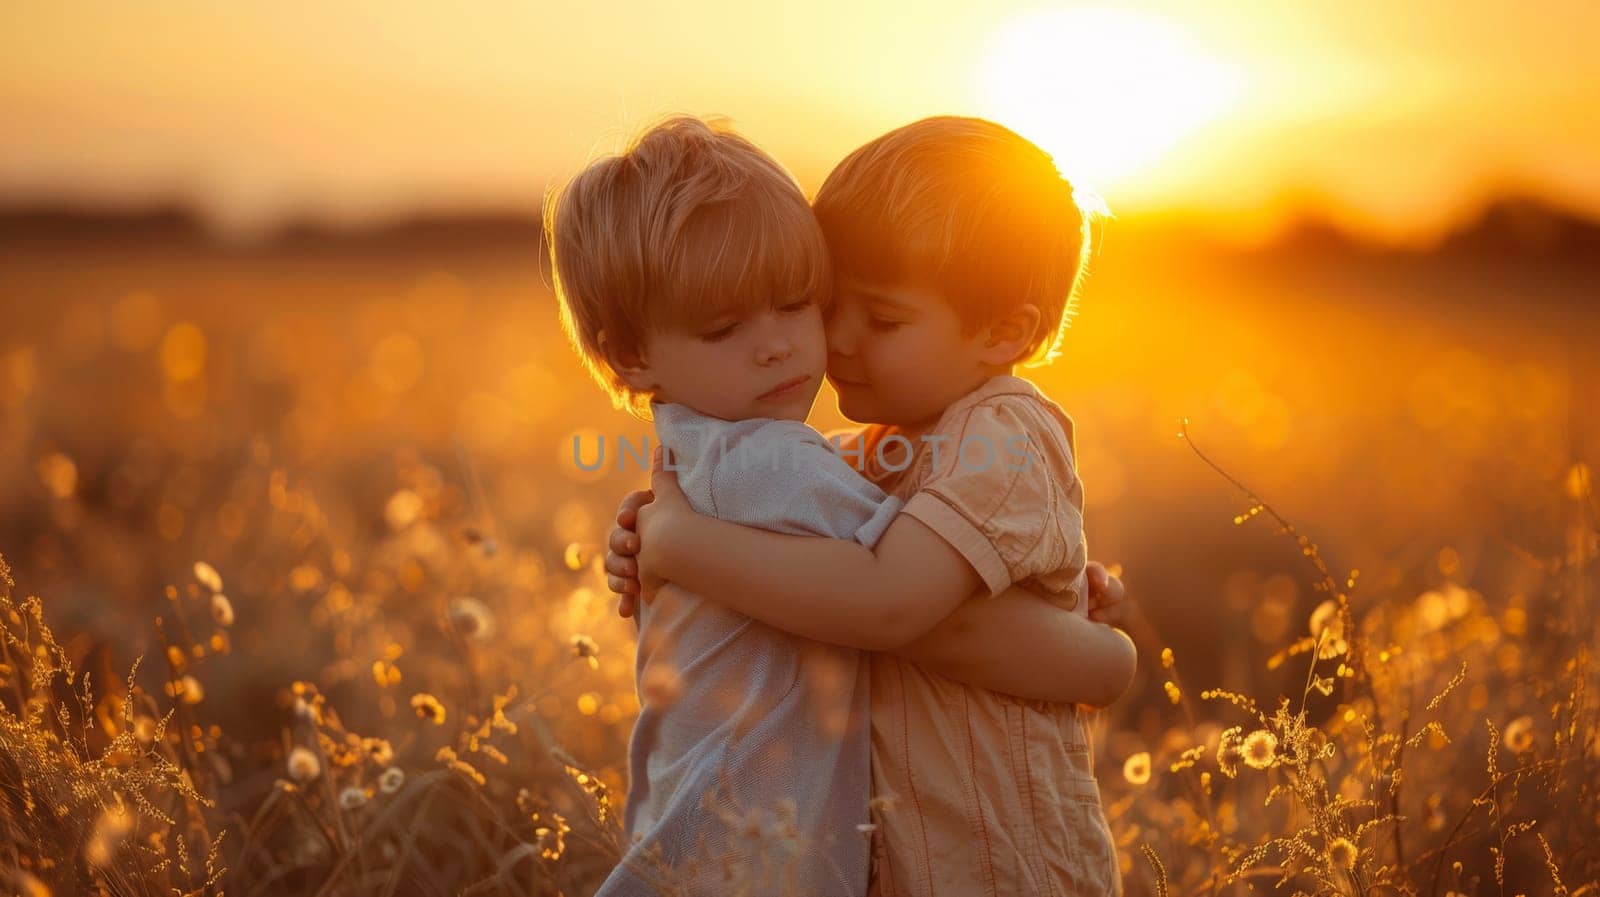 Two young boys hugging each other in a field at sunset